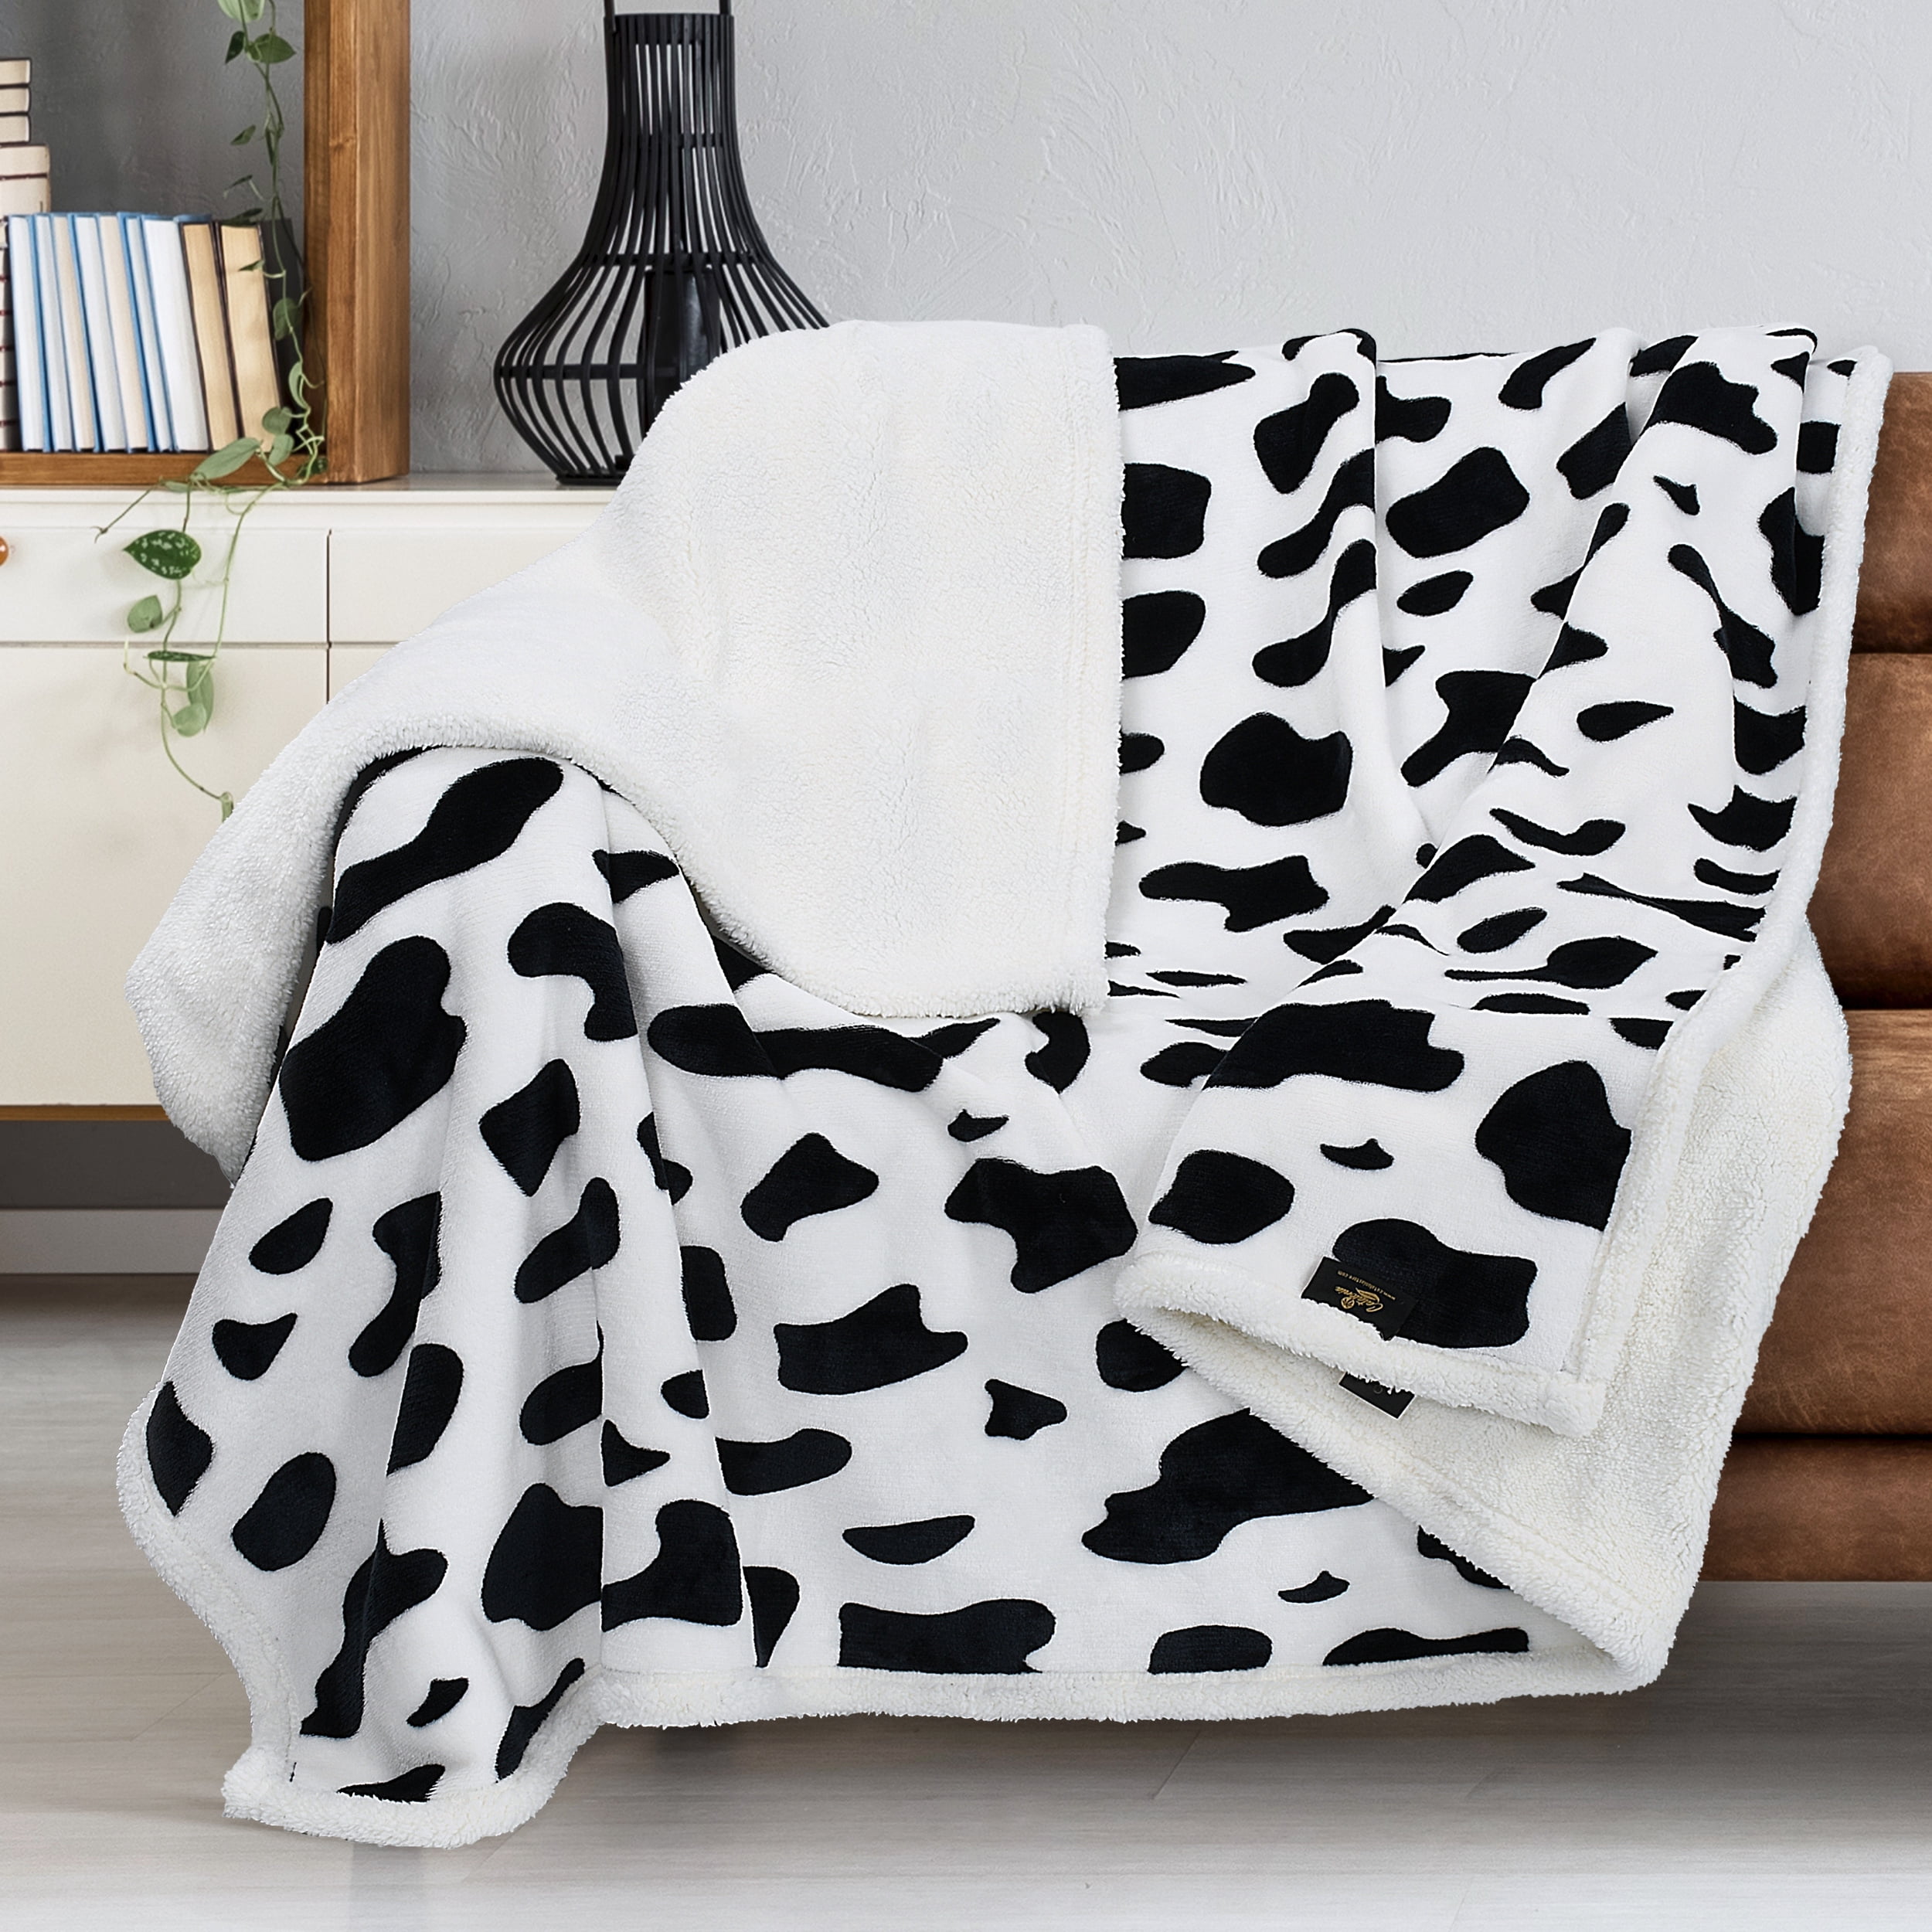 Naivey Cozy Soft Throw Blanket Cute Animal Lamb Personalized Throw Blanket Warmer 50 x 60 Throw Blankets for Couch Office Bed 